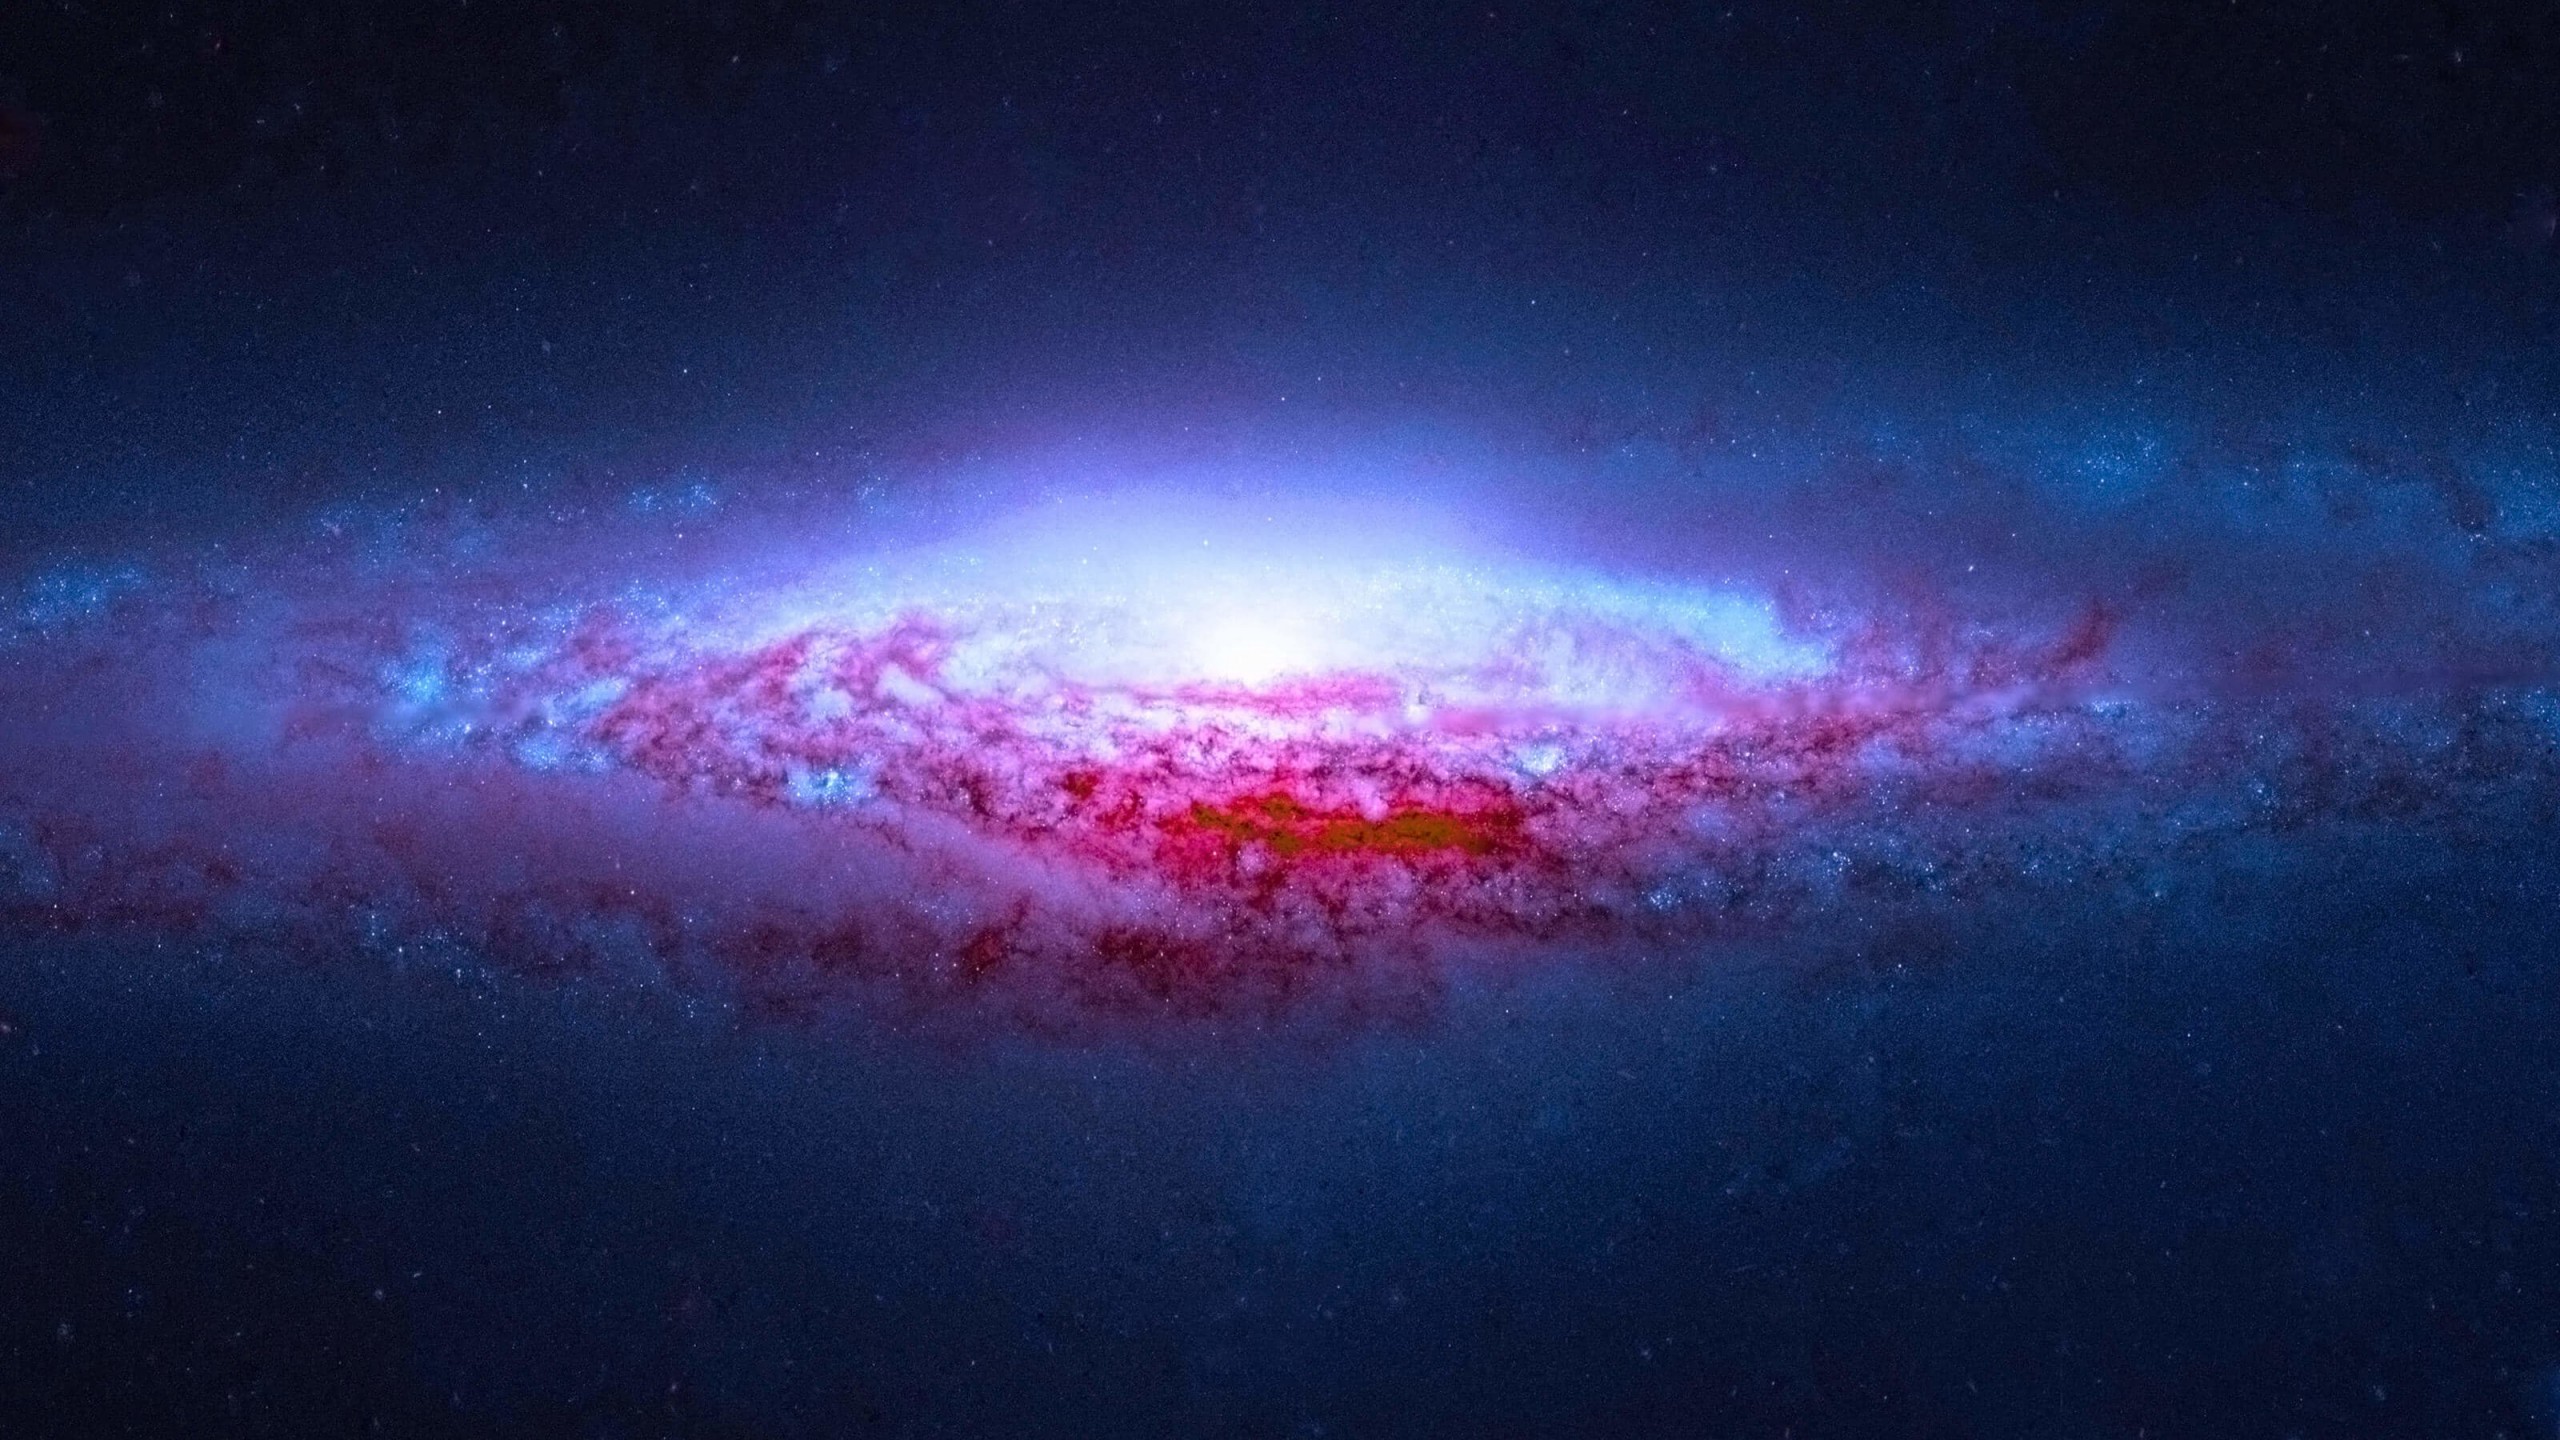 NGC 2683 Spiral Galaxy Wallpaper for Social Media YouTube Channel Art